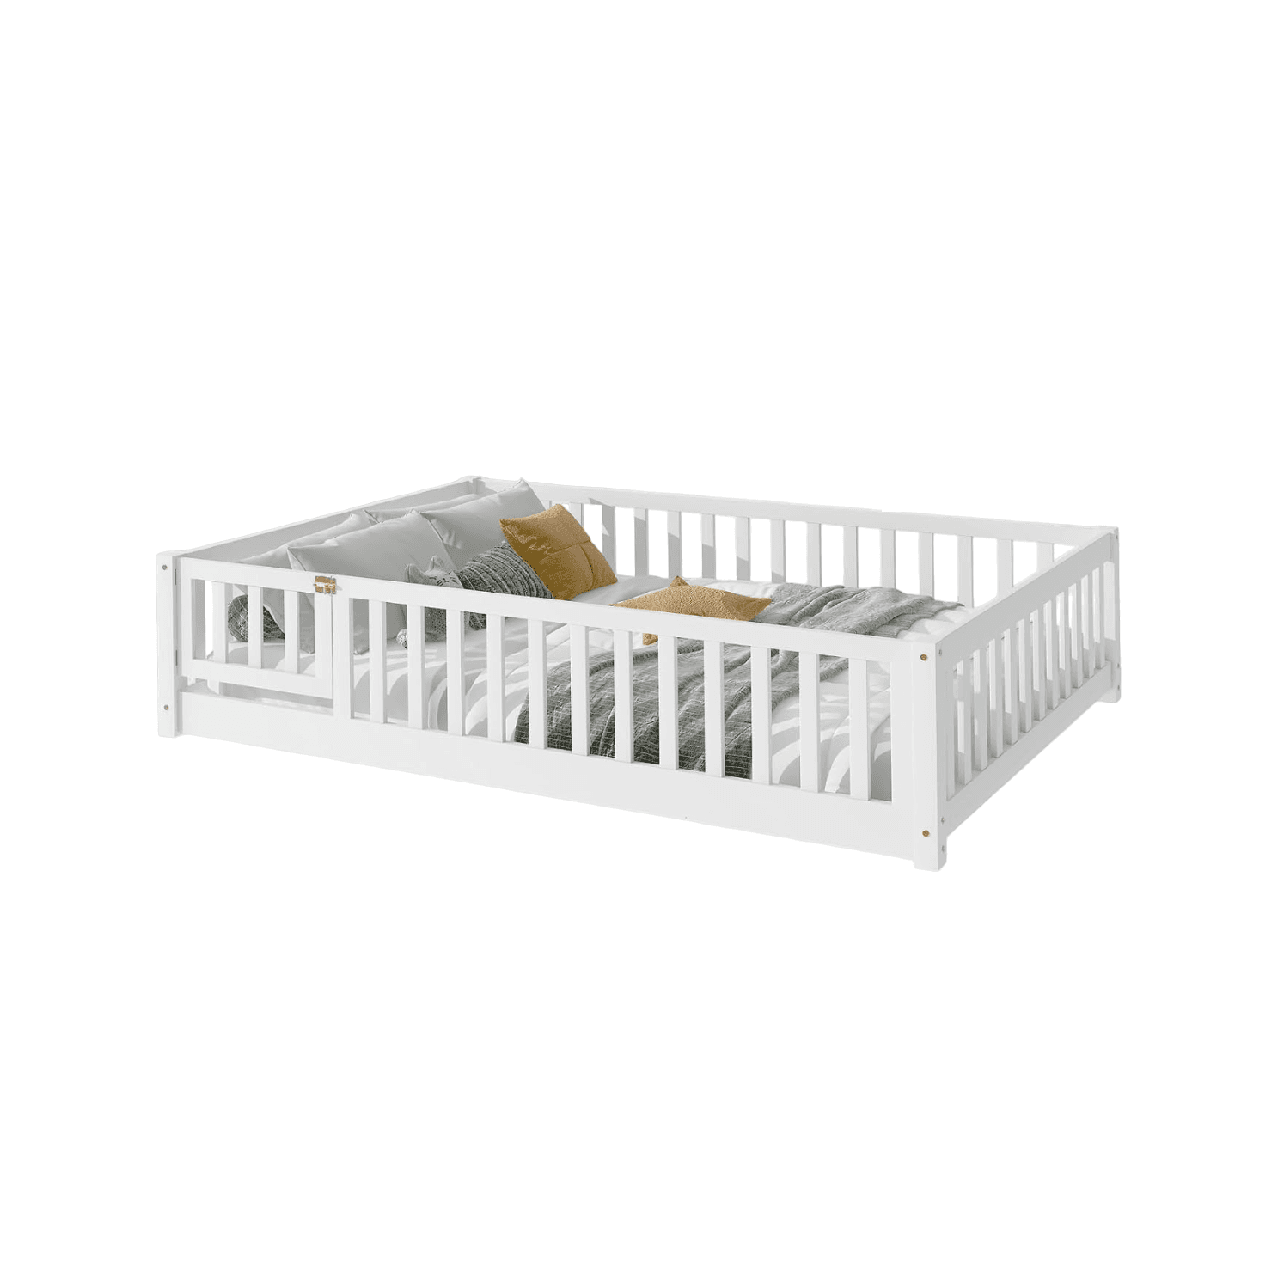 Montessori Tatub Full Size Floor Bed With Rails and Door and Slats Milky White